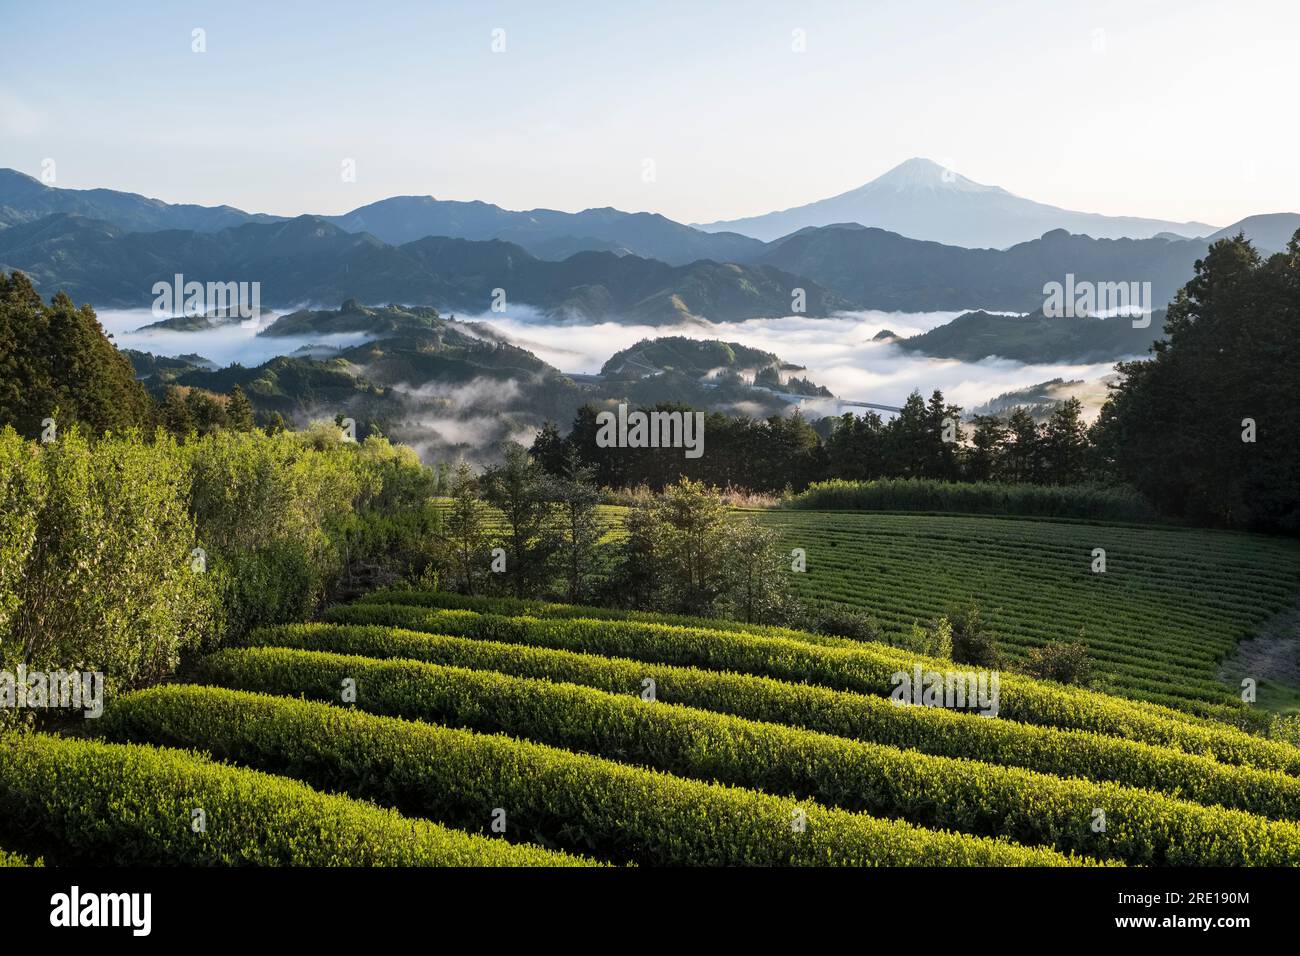 Japan, Yoshiwara: landscape with hills, tea plantations, Mount Fuji and mist in the valley, Honshu Island Stock Photo